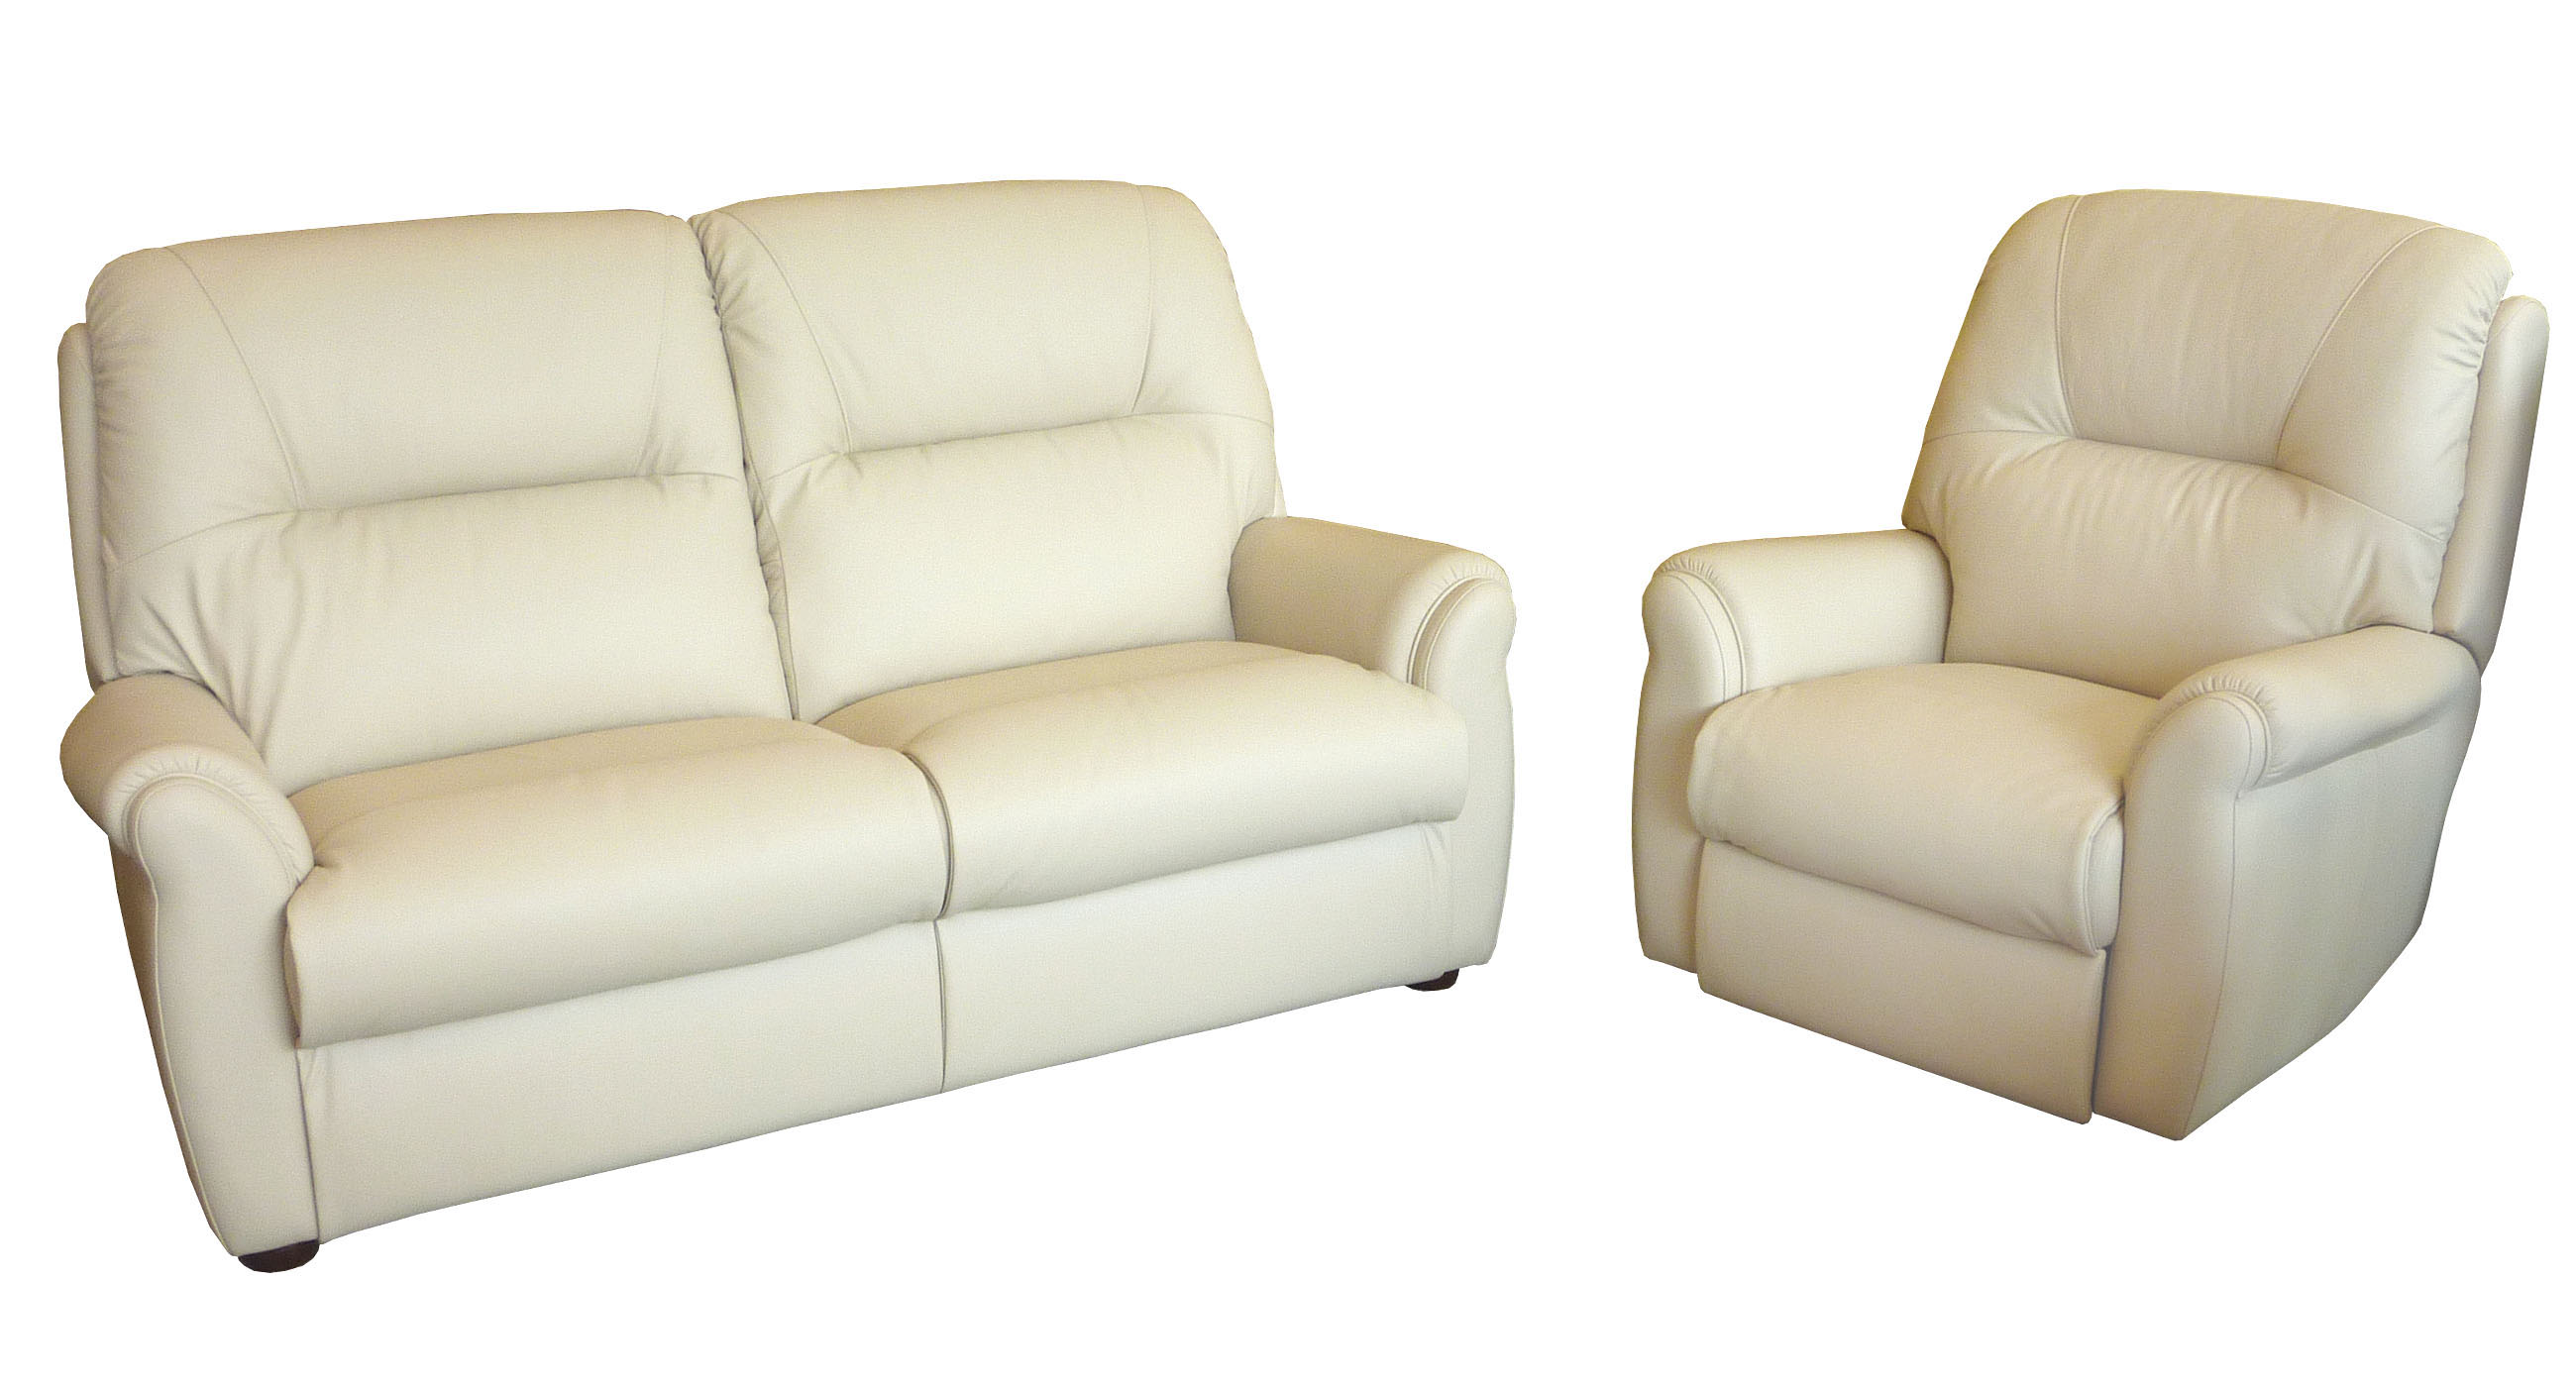 Bailey Reclining Sofa and Chairs